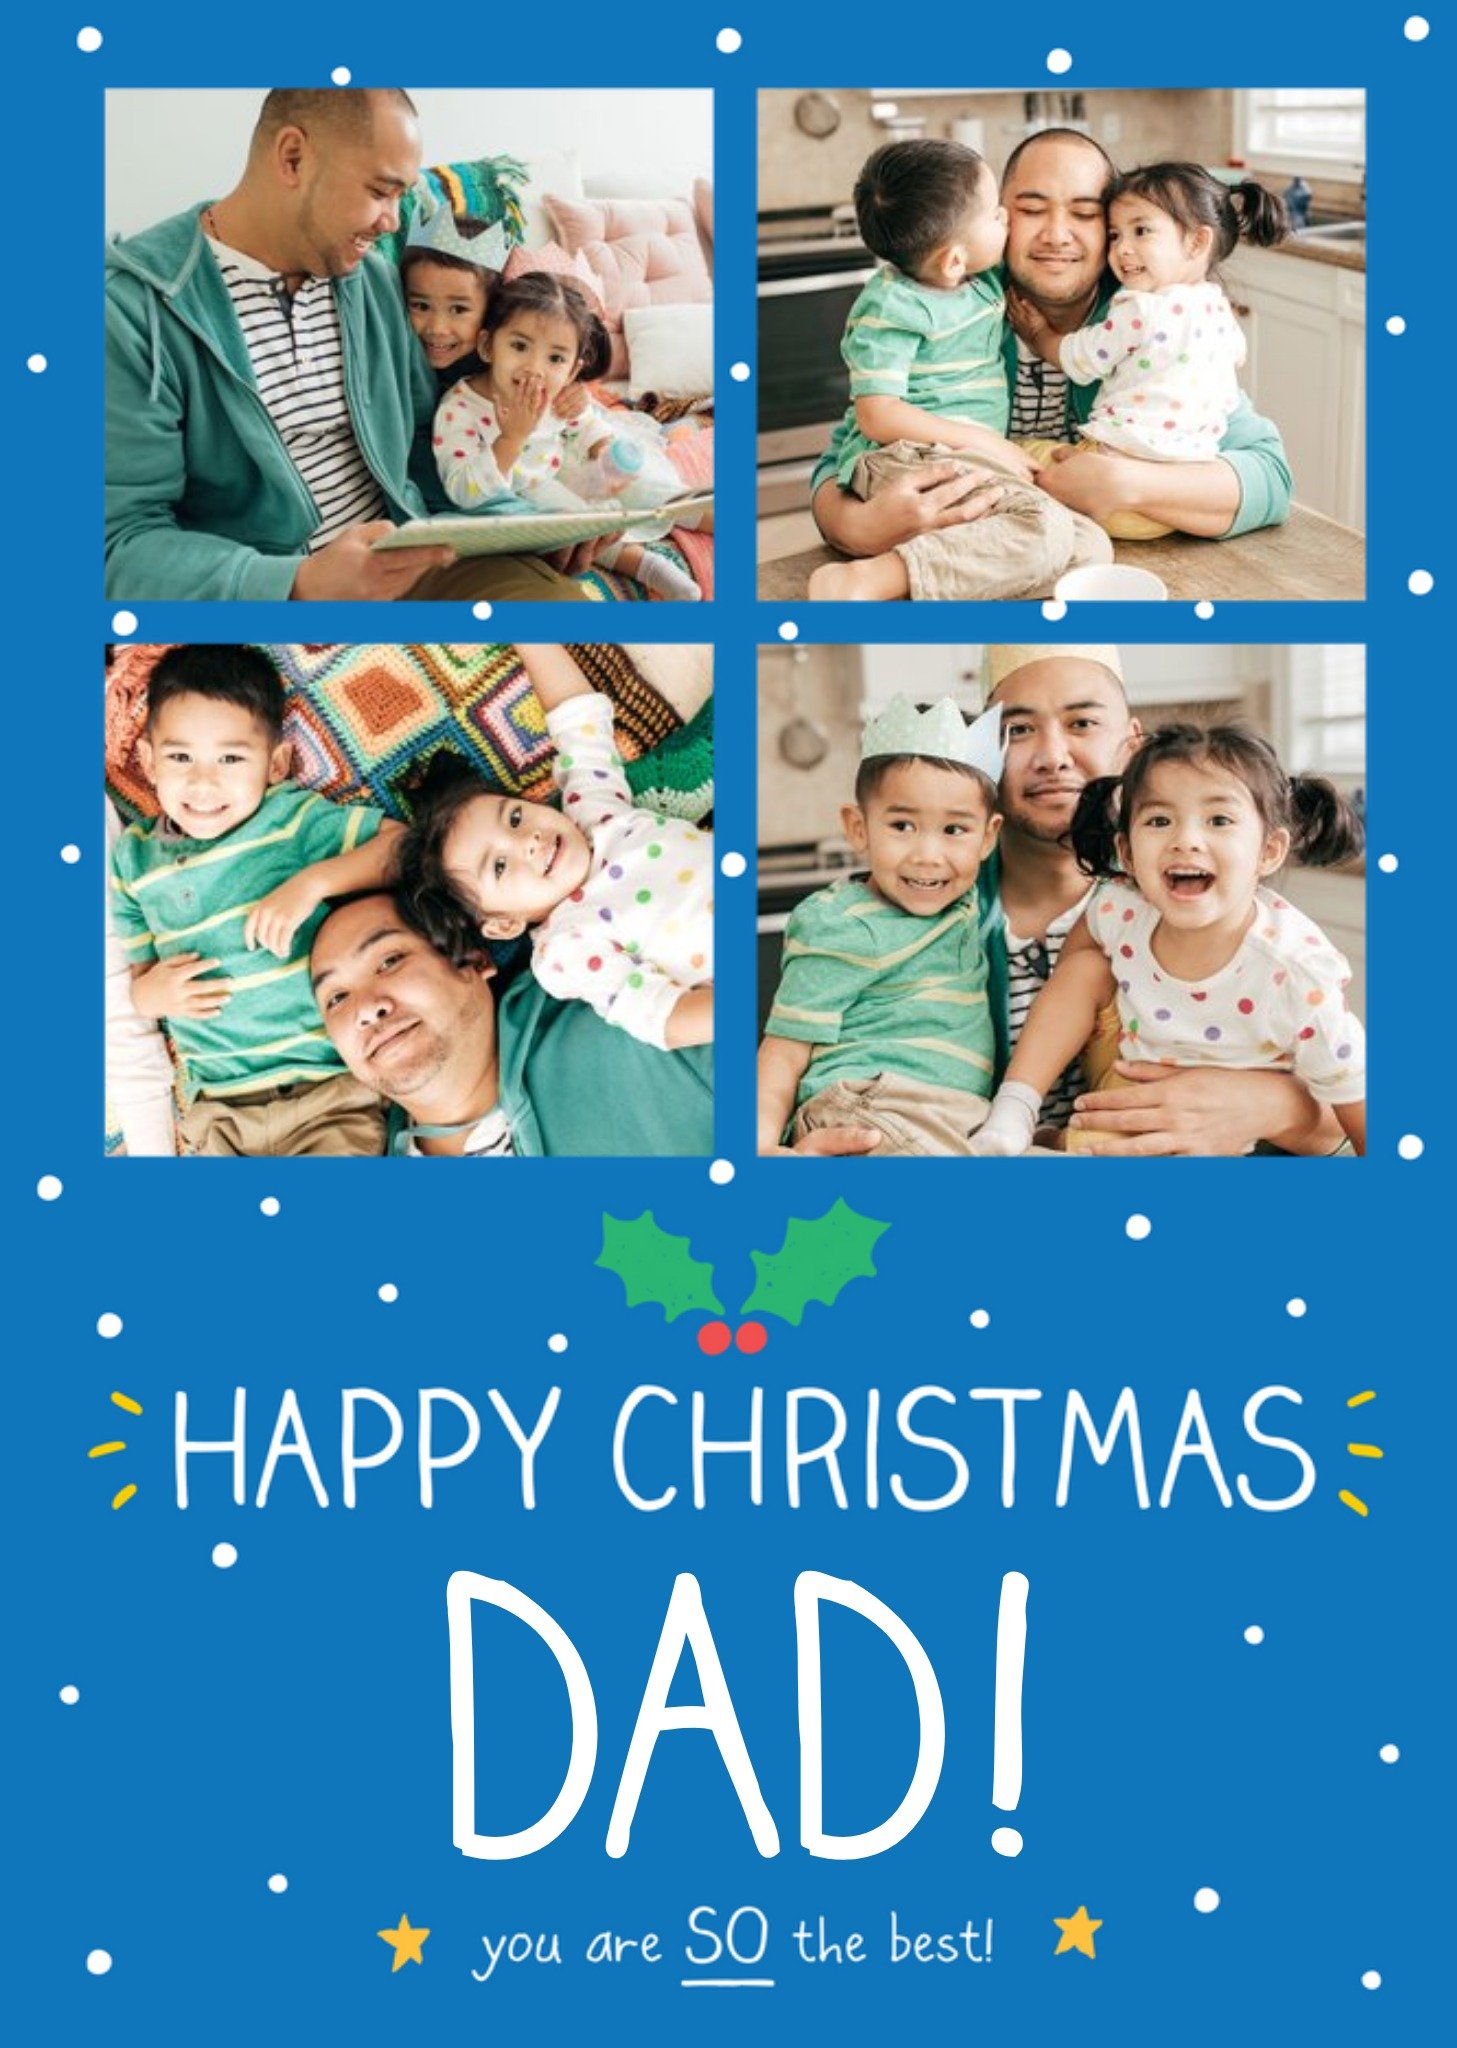 Happy Jackson Photo Upload Christmas Card For Dad, You Are So The Best, Large